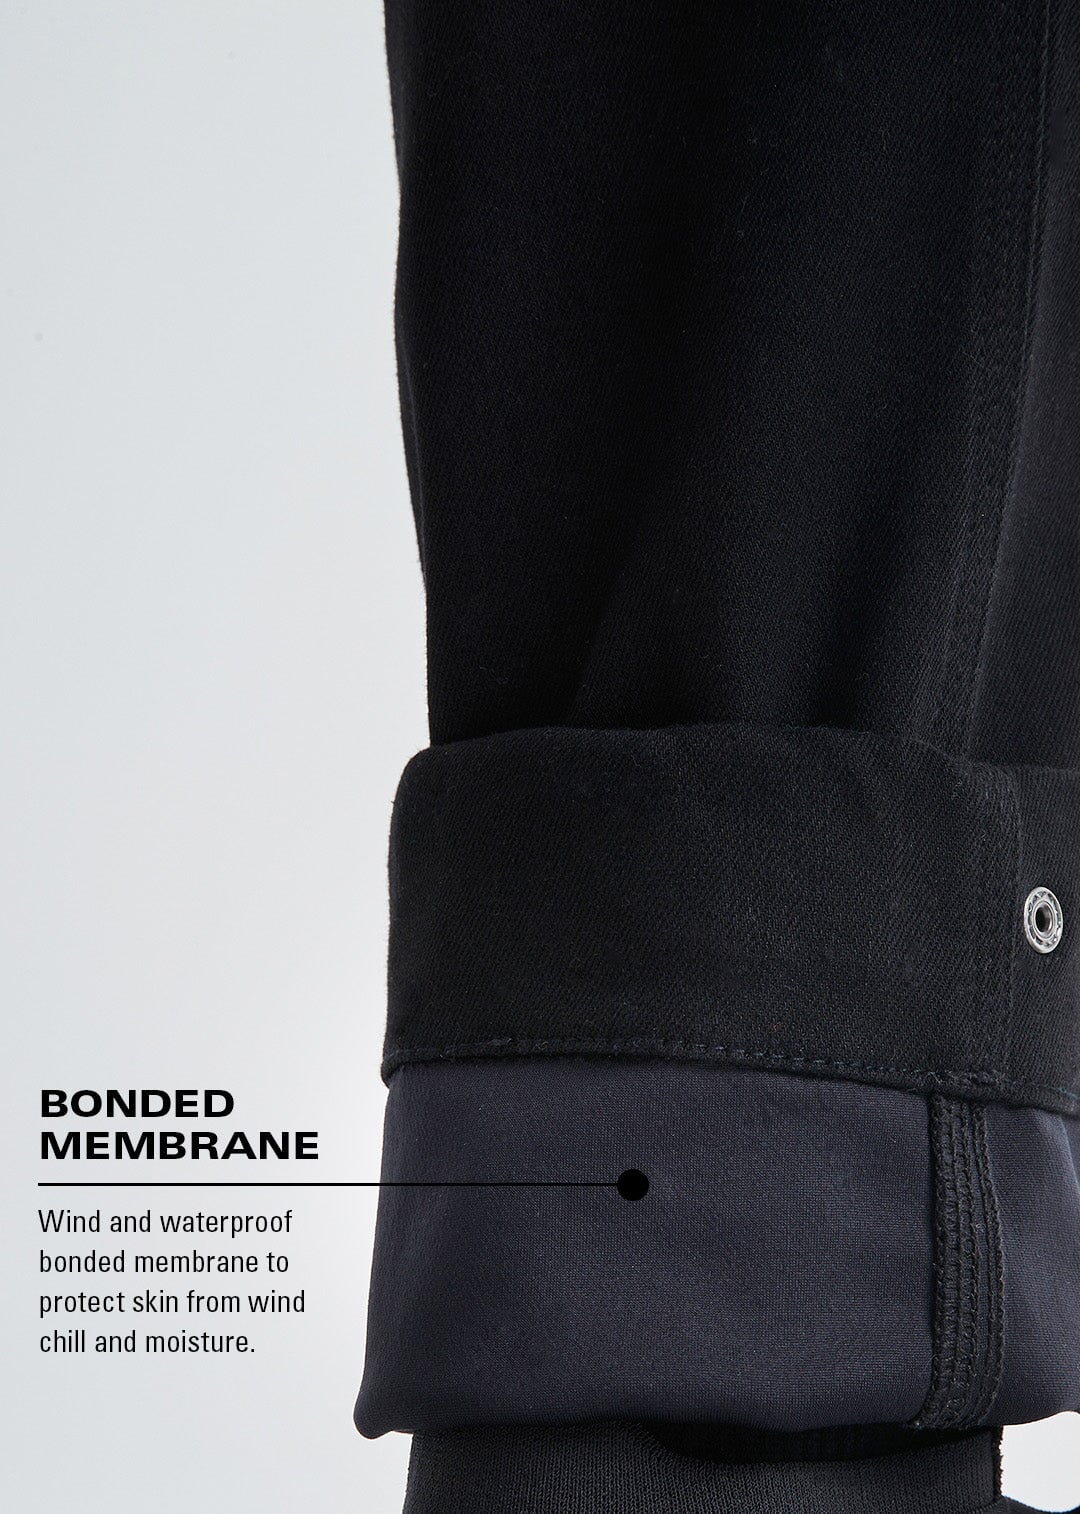 jeans with a wind and waterproof bonded membrane to protect skin from wind chill and moisture